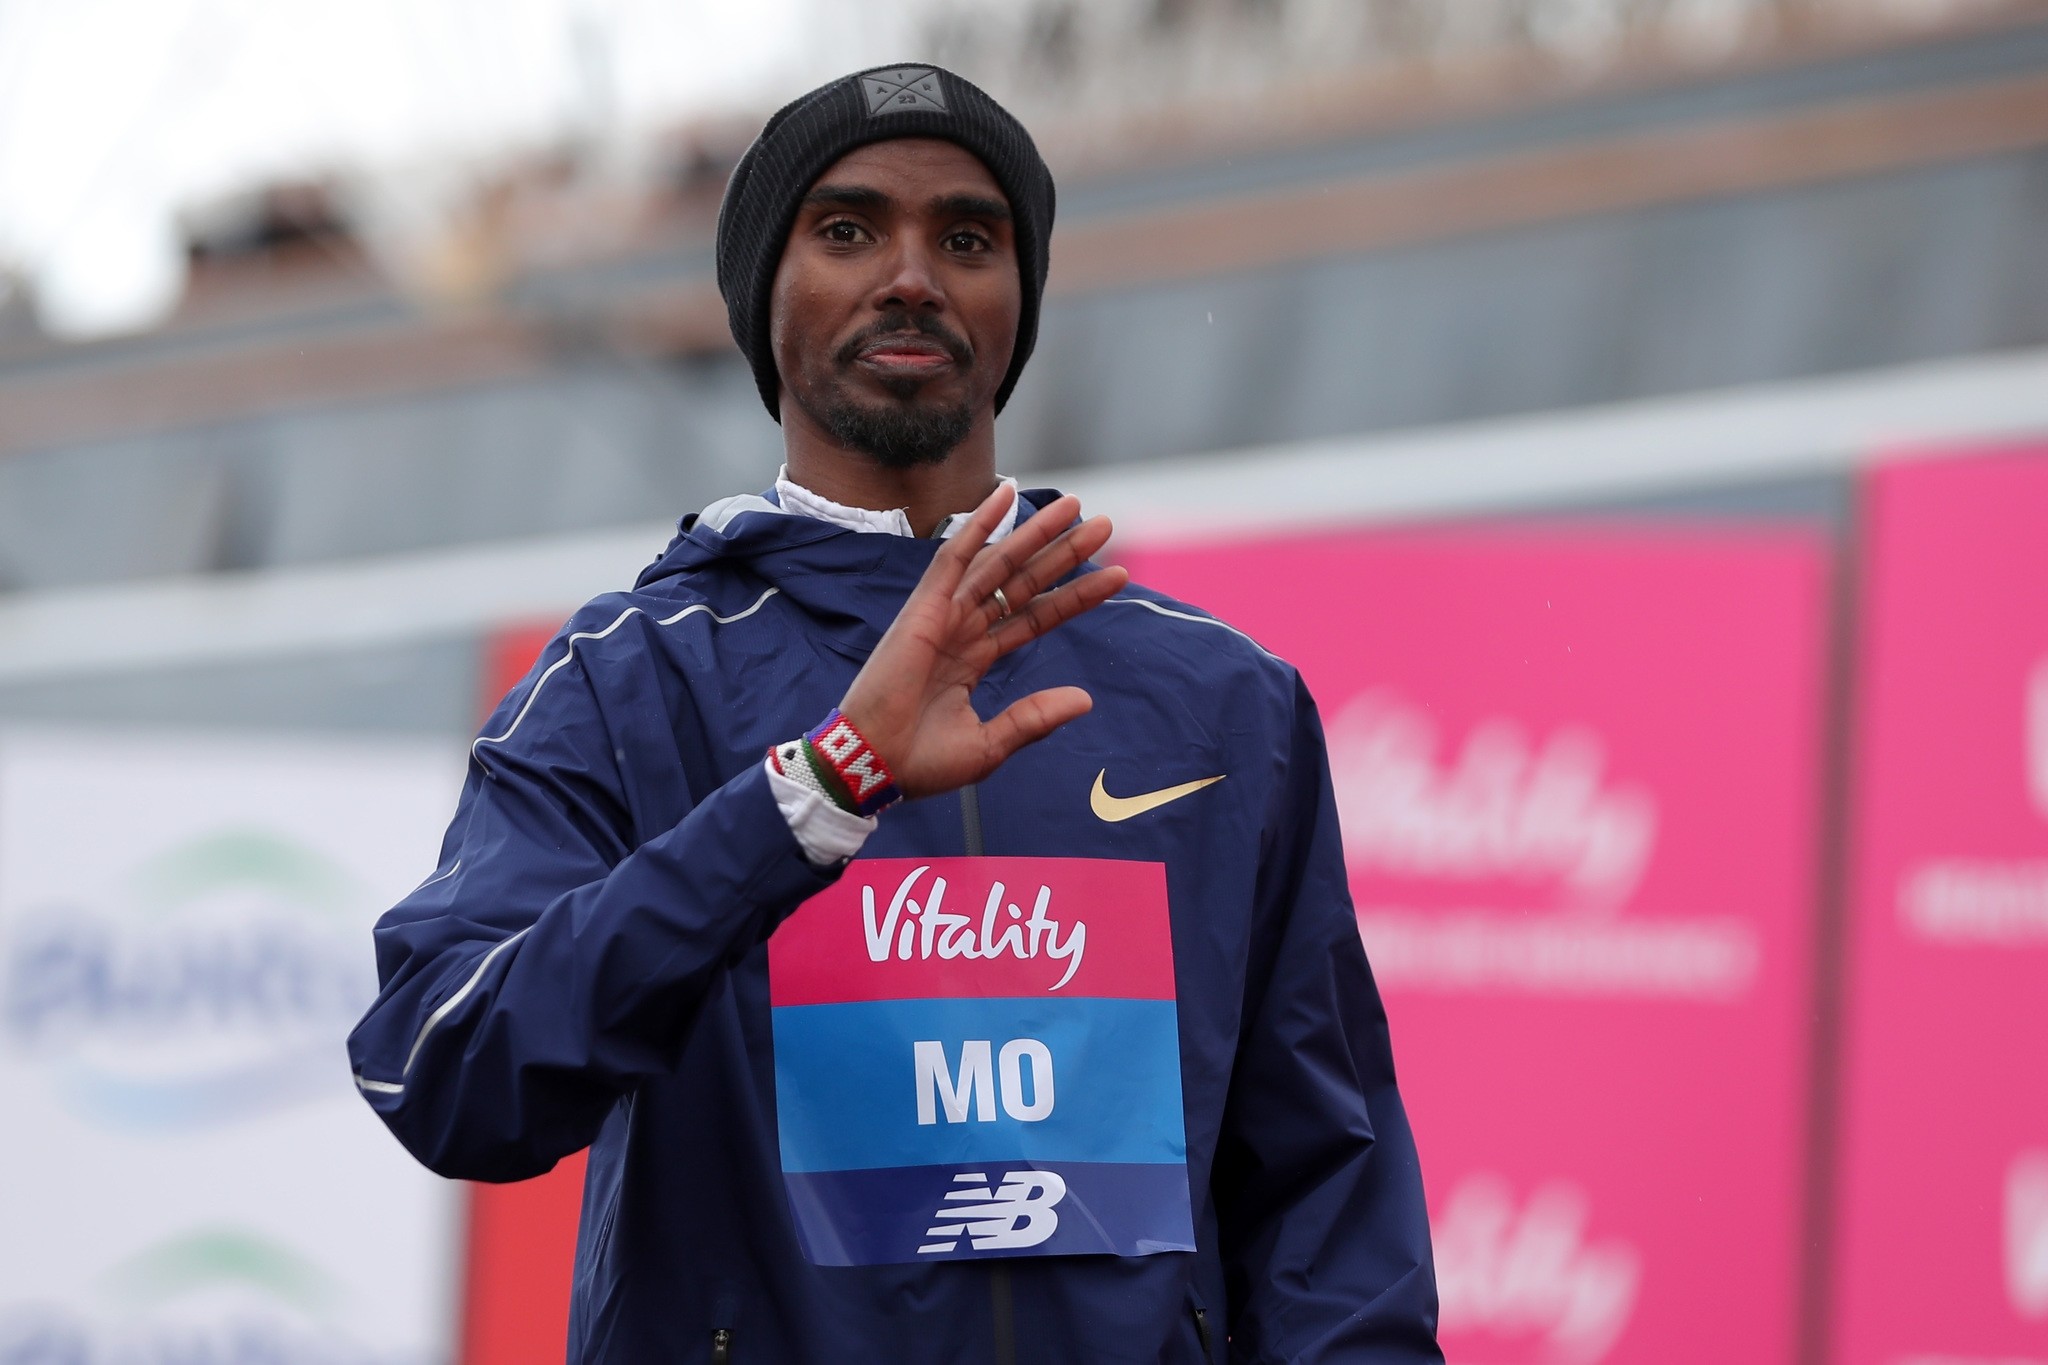 Winner Britain's Mo Farah gestures after the half marathon elite men's race during the inaugural The Big Half in London on March 4, 2018. (AFP Photo)